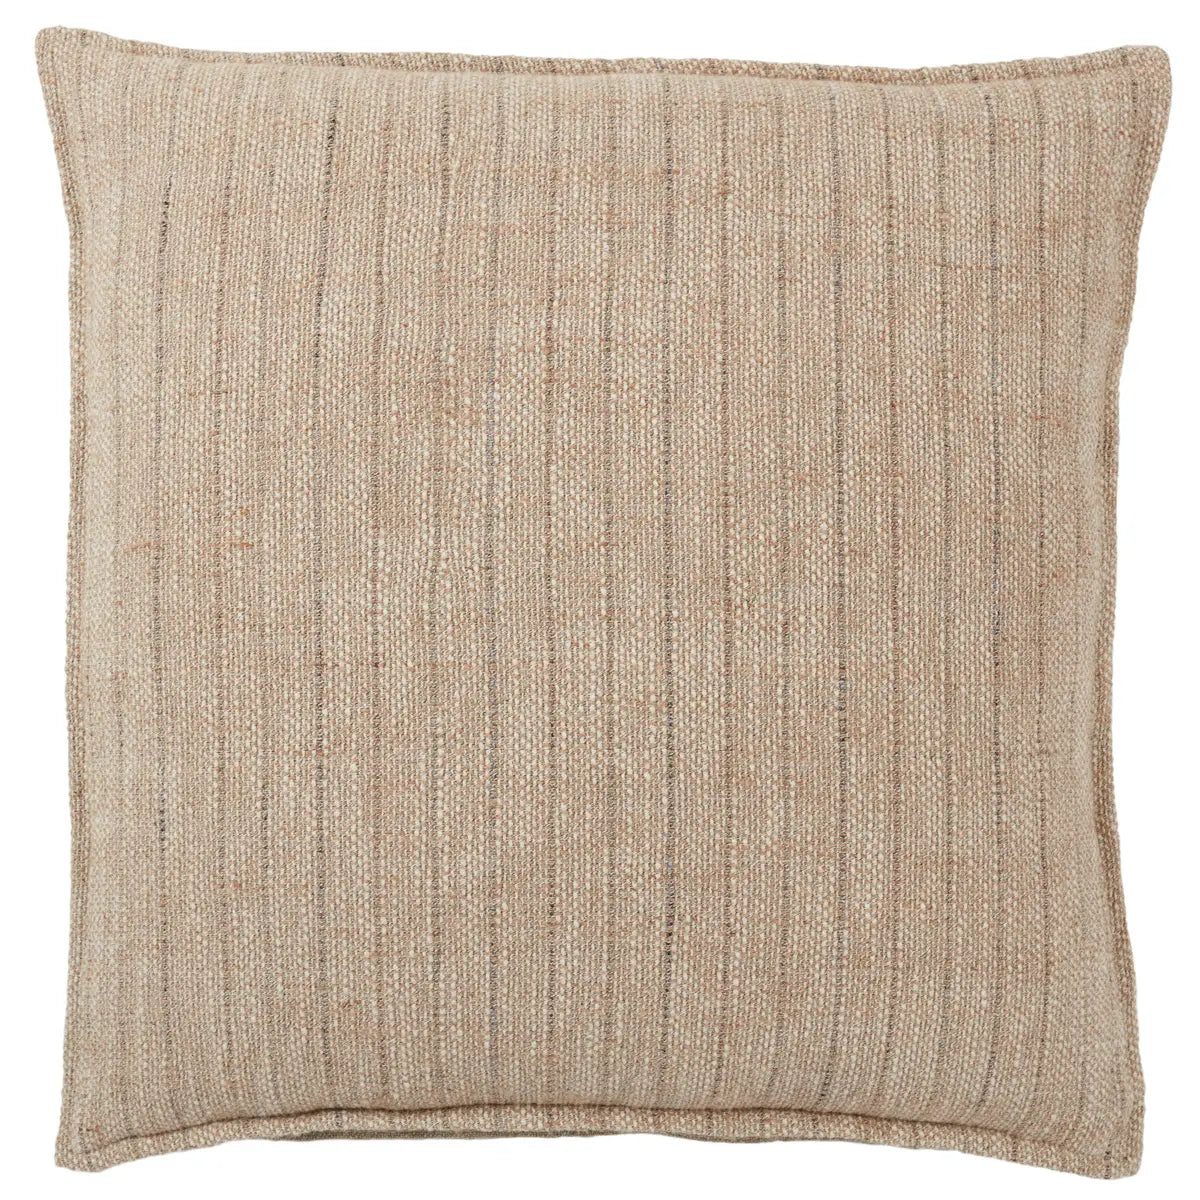 The Tanzy Murdoch Pillow boasts an assortment of earthy tones and simple patterns for cozy, inviting looks that complement any style. The reversible Murdoch throw pillow features a solid heathered and stripe pattern in a contemporary light brown and cream colorway. Amethyst Home provides interior design services, furniture, rugs, and lighting in the Kansas City metro area.